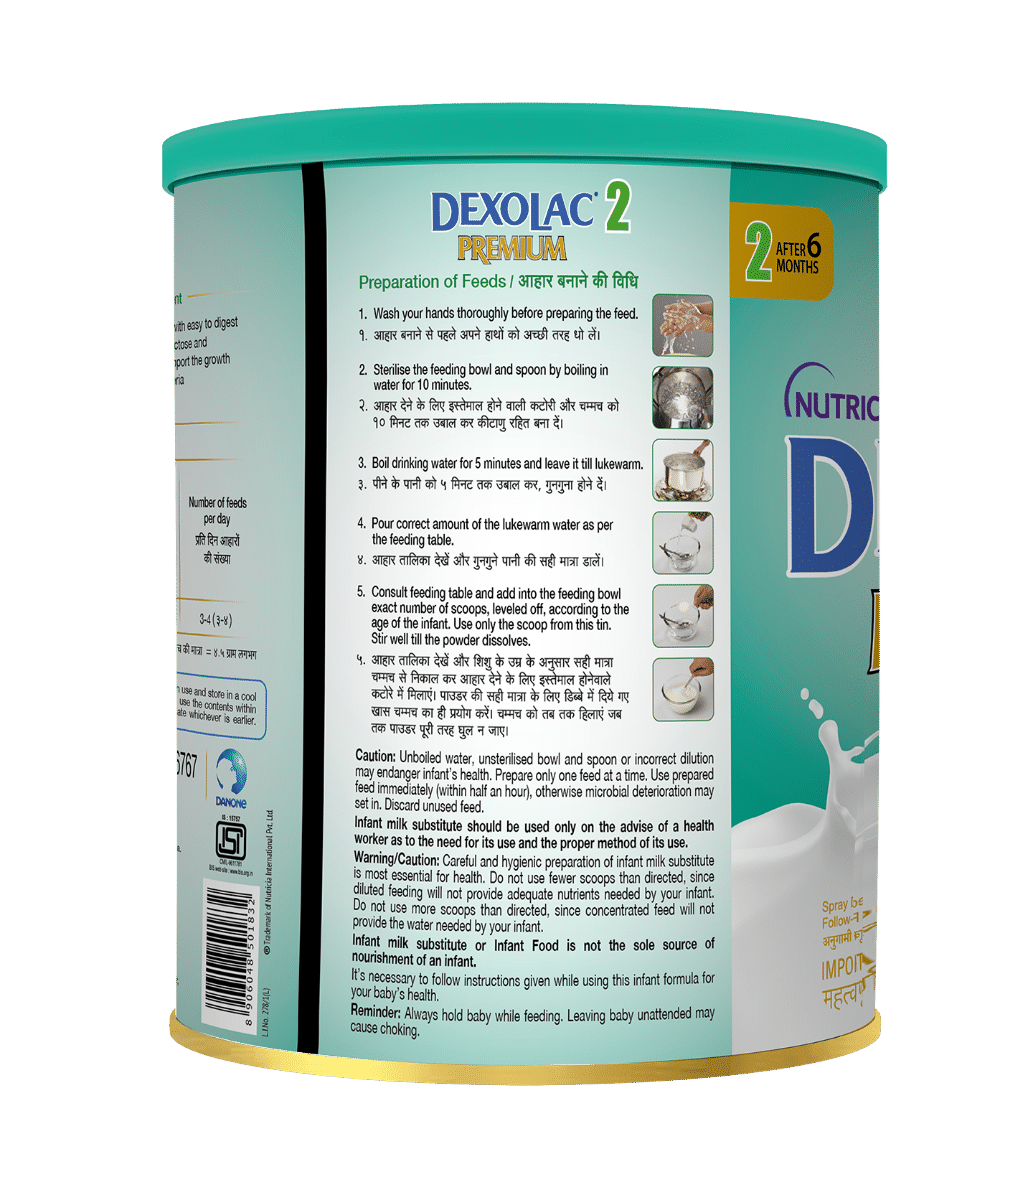 Dexolac Premium Infant Formula Stage 2 Powder for After 6 Months Kid, 400 gm, Pack of 1 